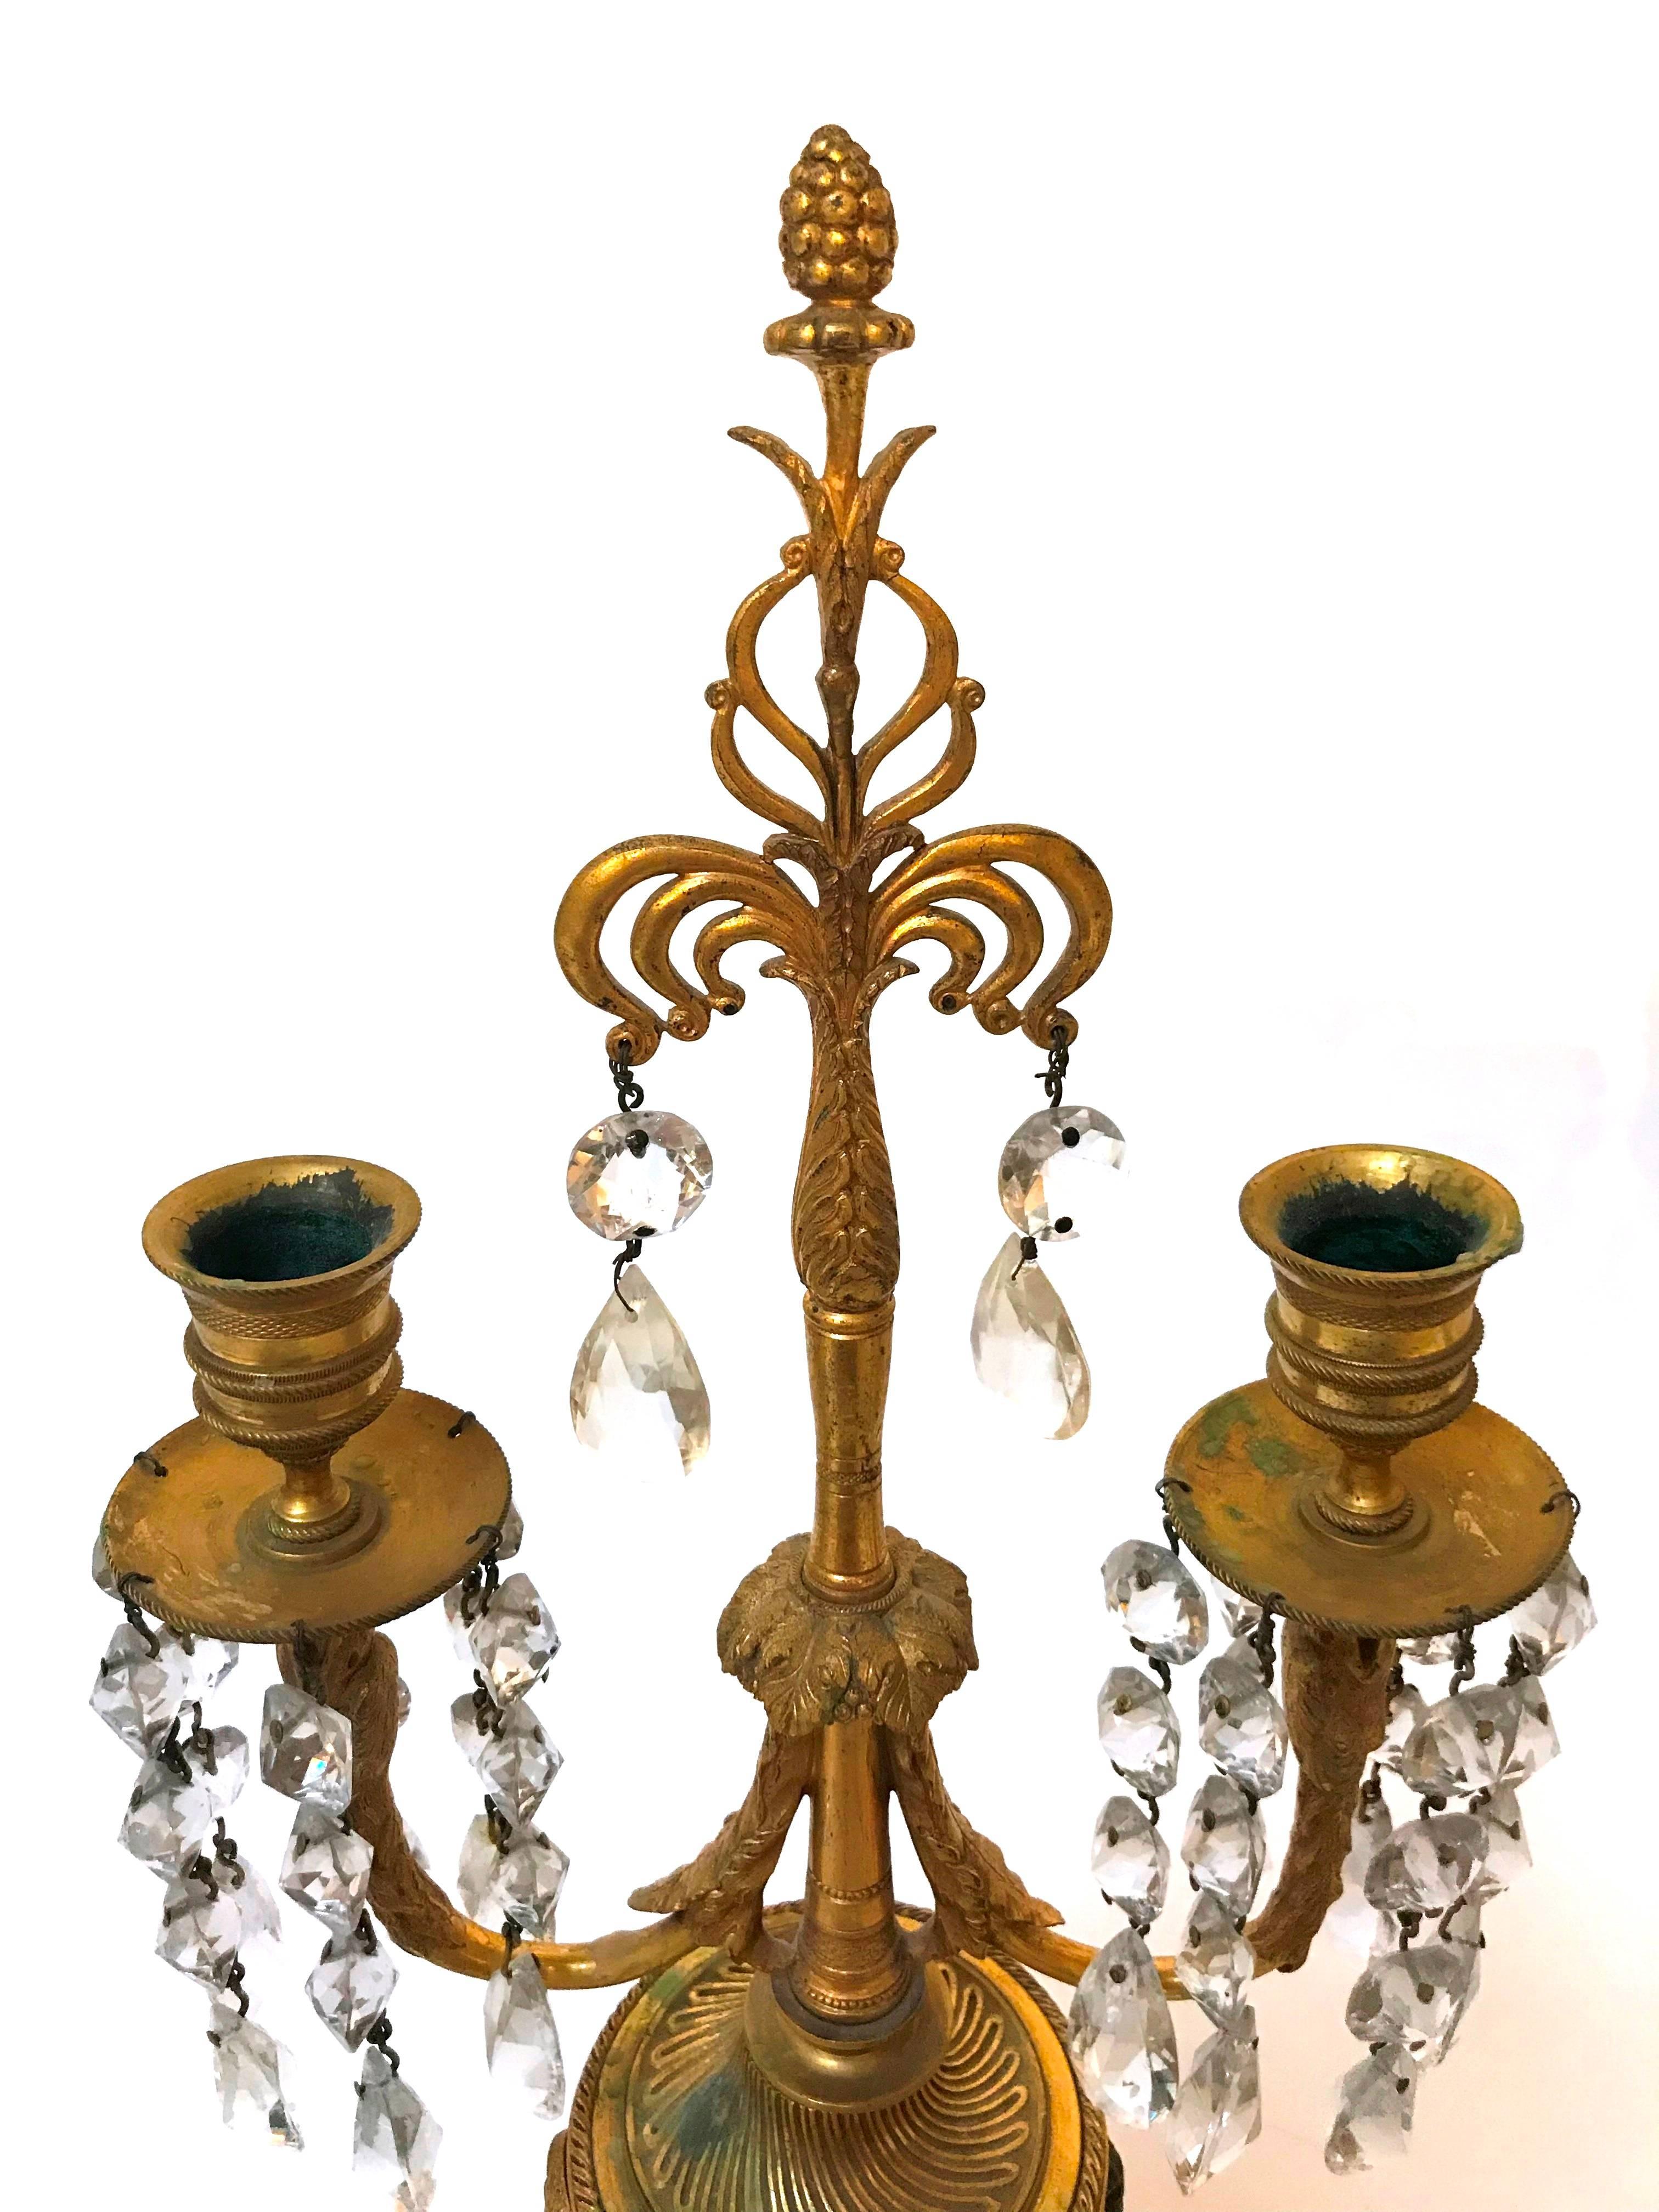 A nice pair of Napoleon III two-light candle stands made of marble cassolettes with bronze rams heads, hoof feet and candelabra with drop crystals.